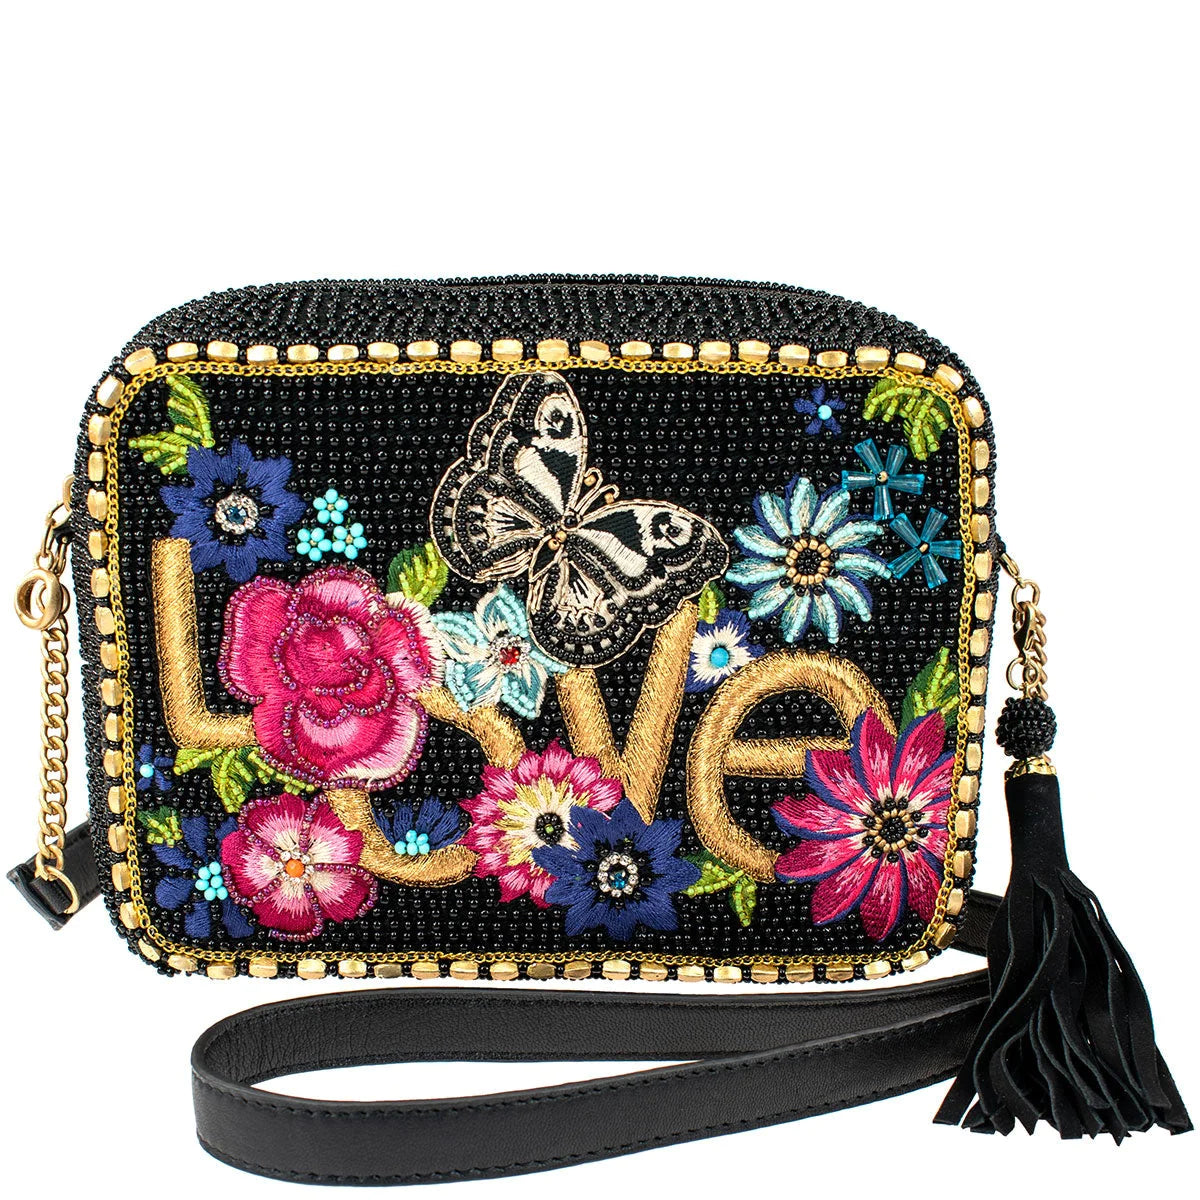 Mary Frances Accessories Love is Love Bag